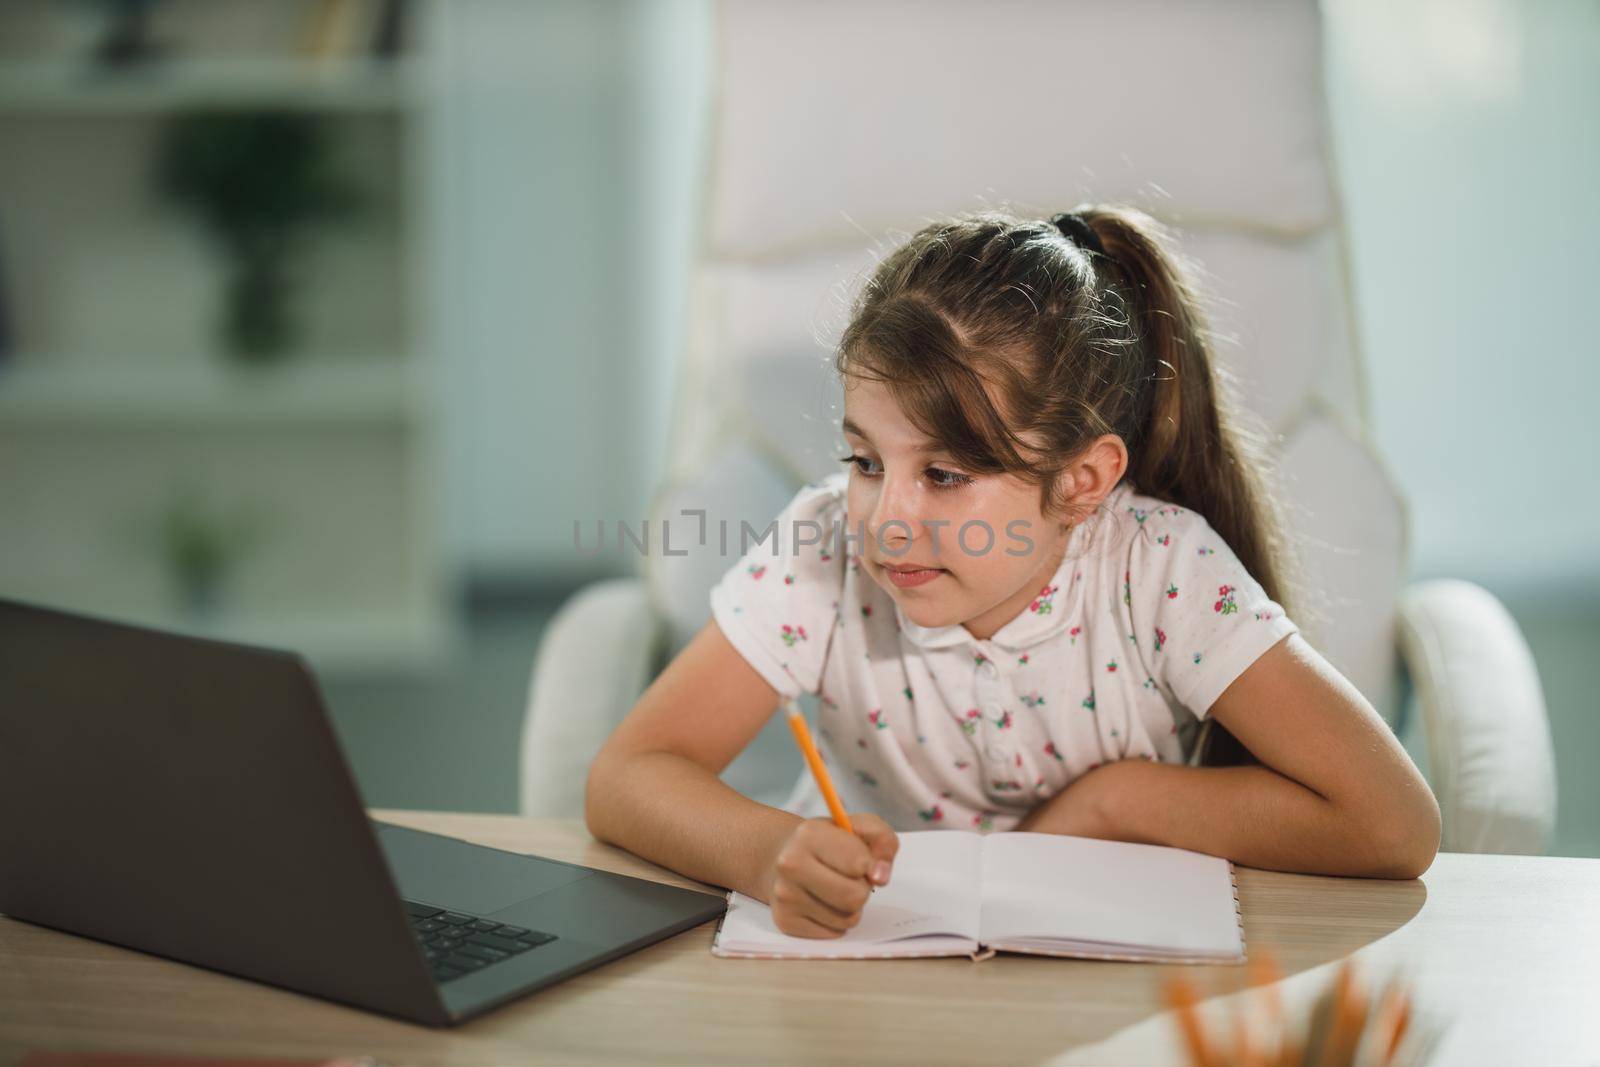 A cute diligent little girl using her laptop to do a online lesson at home.